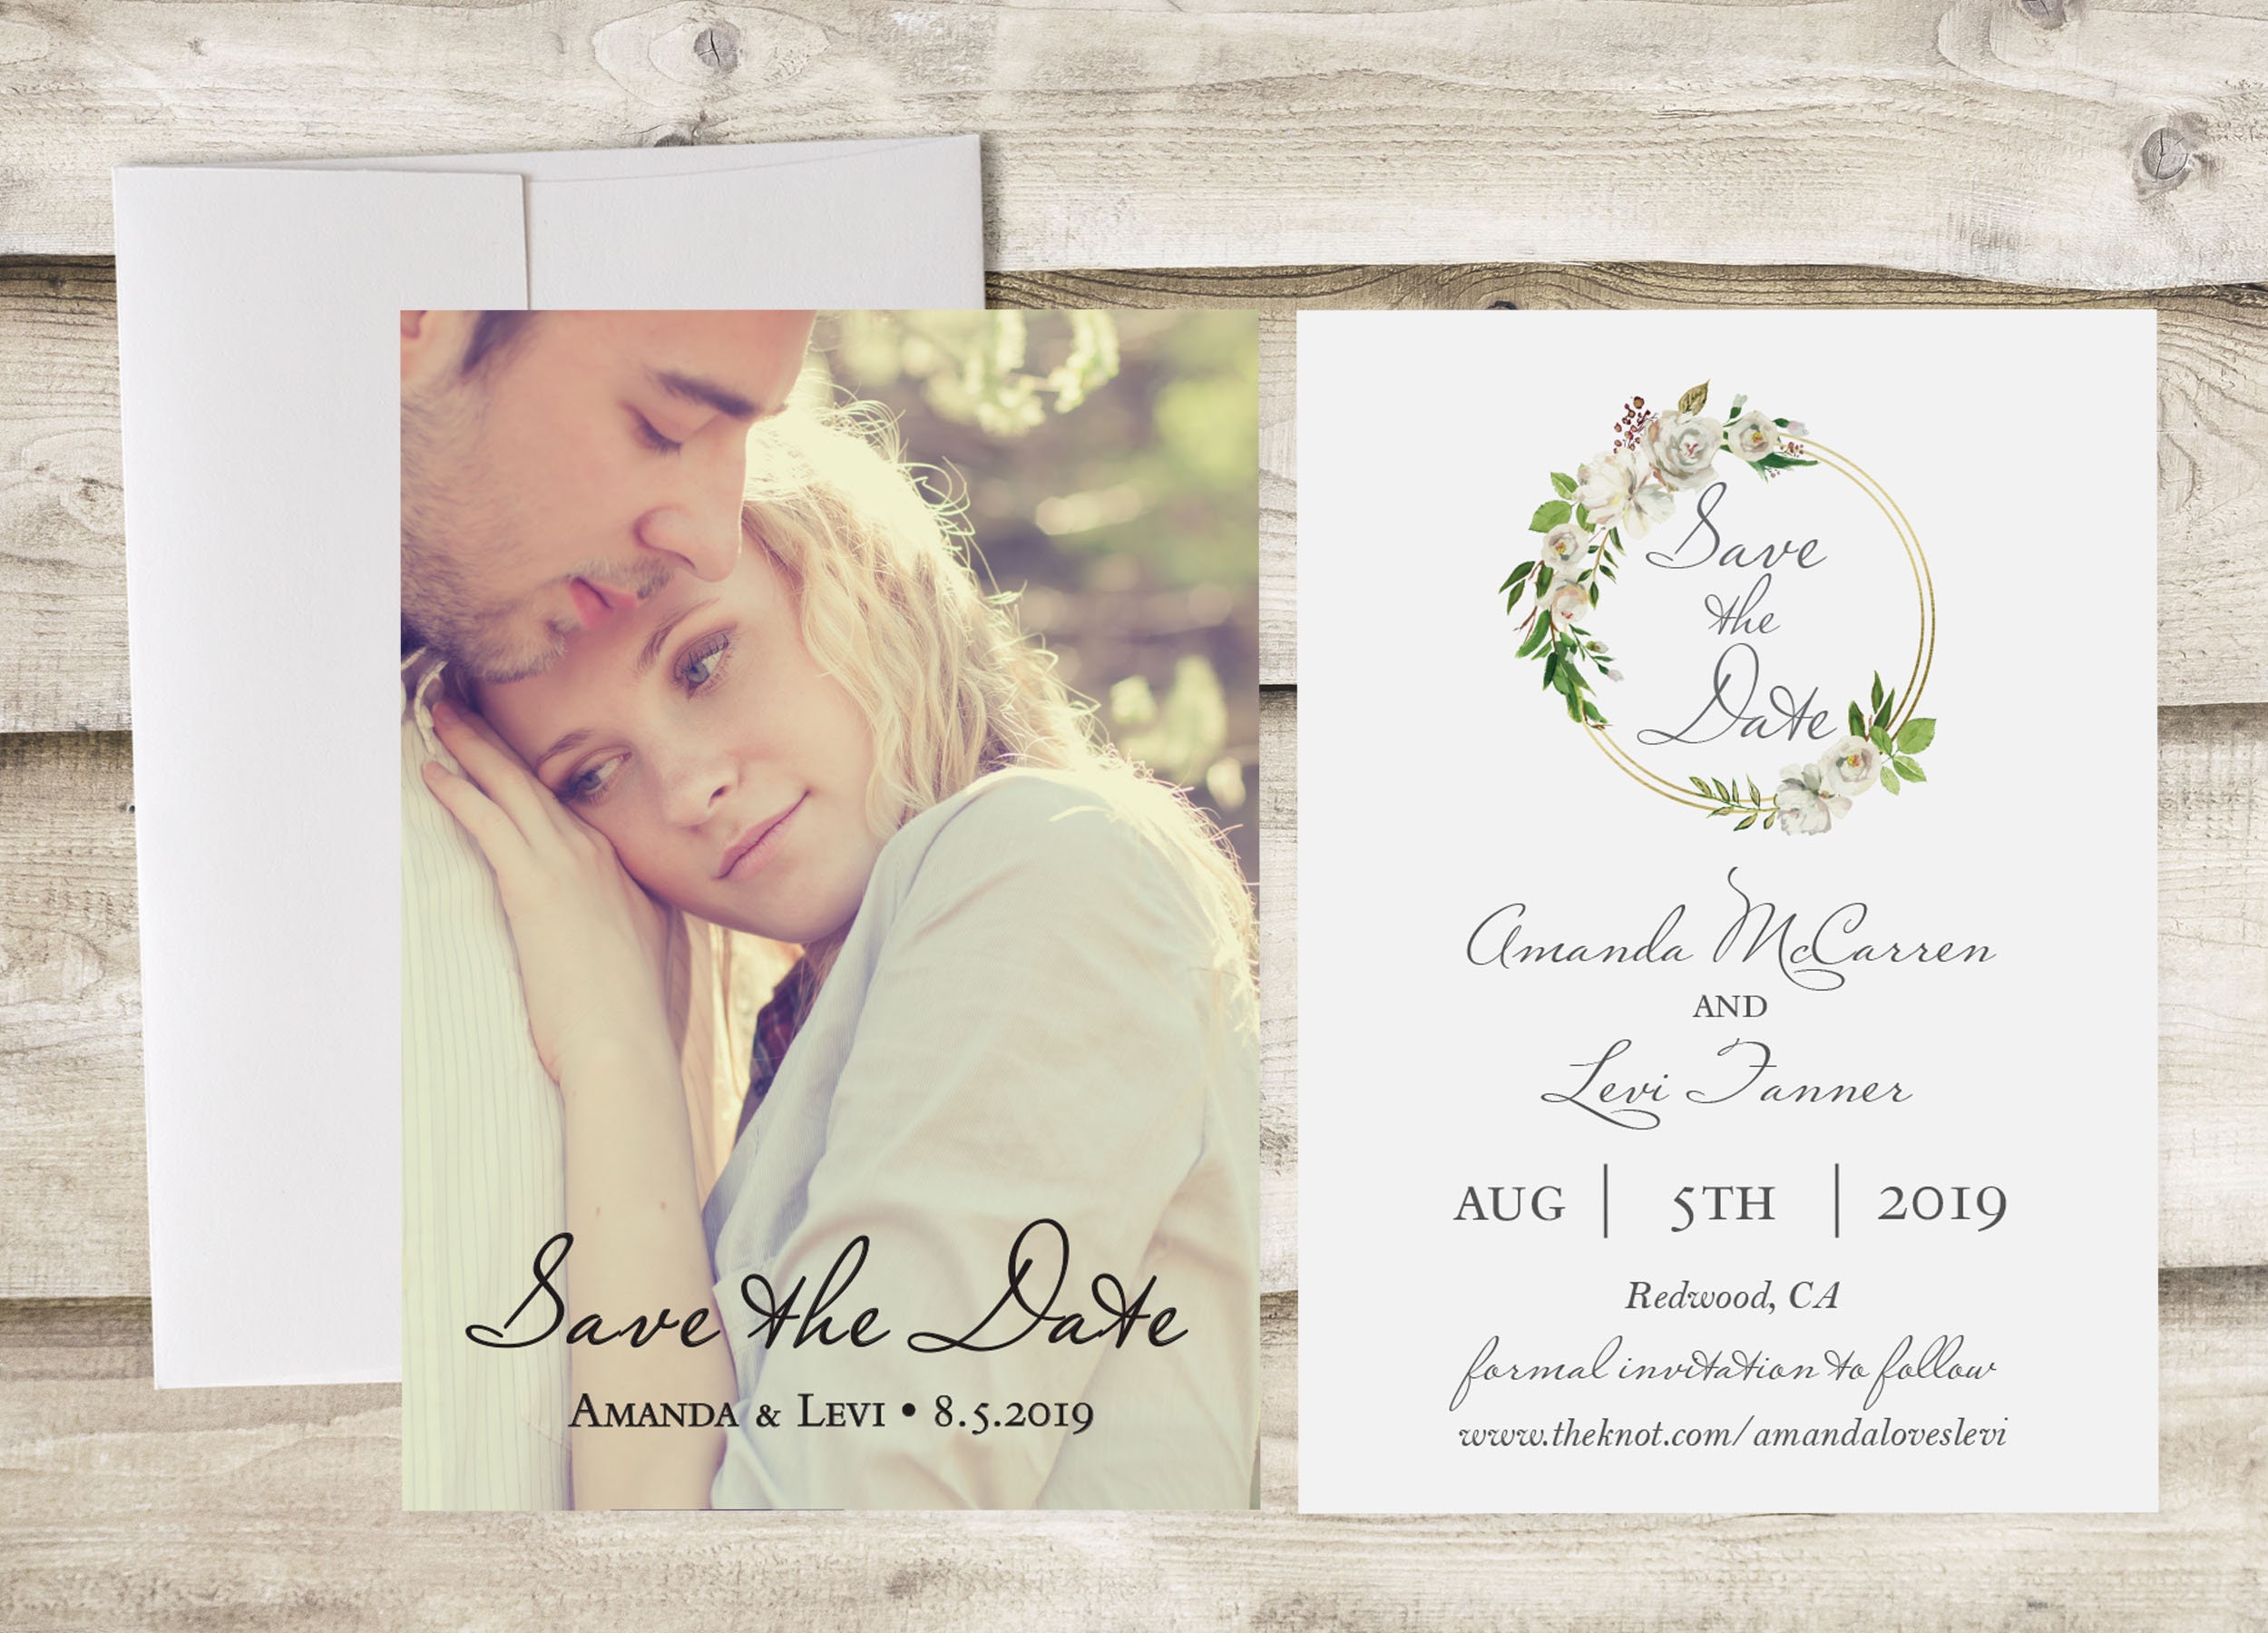 When Is It Too Early to Send Save The Dates?